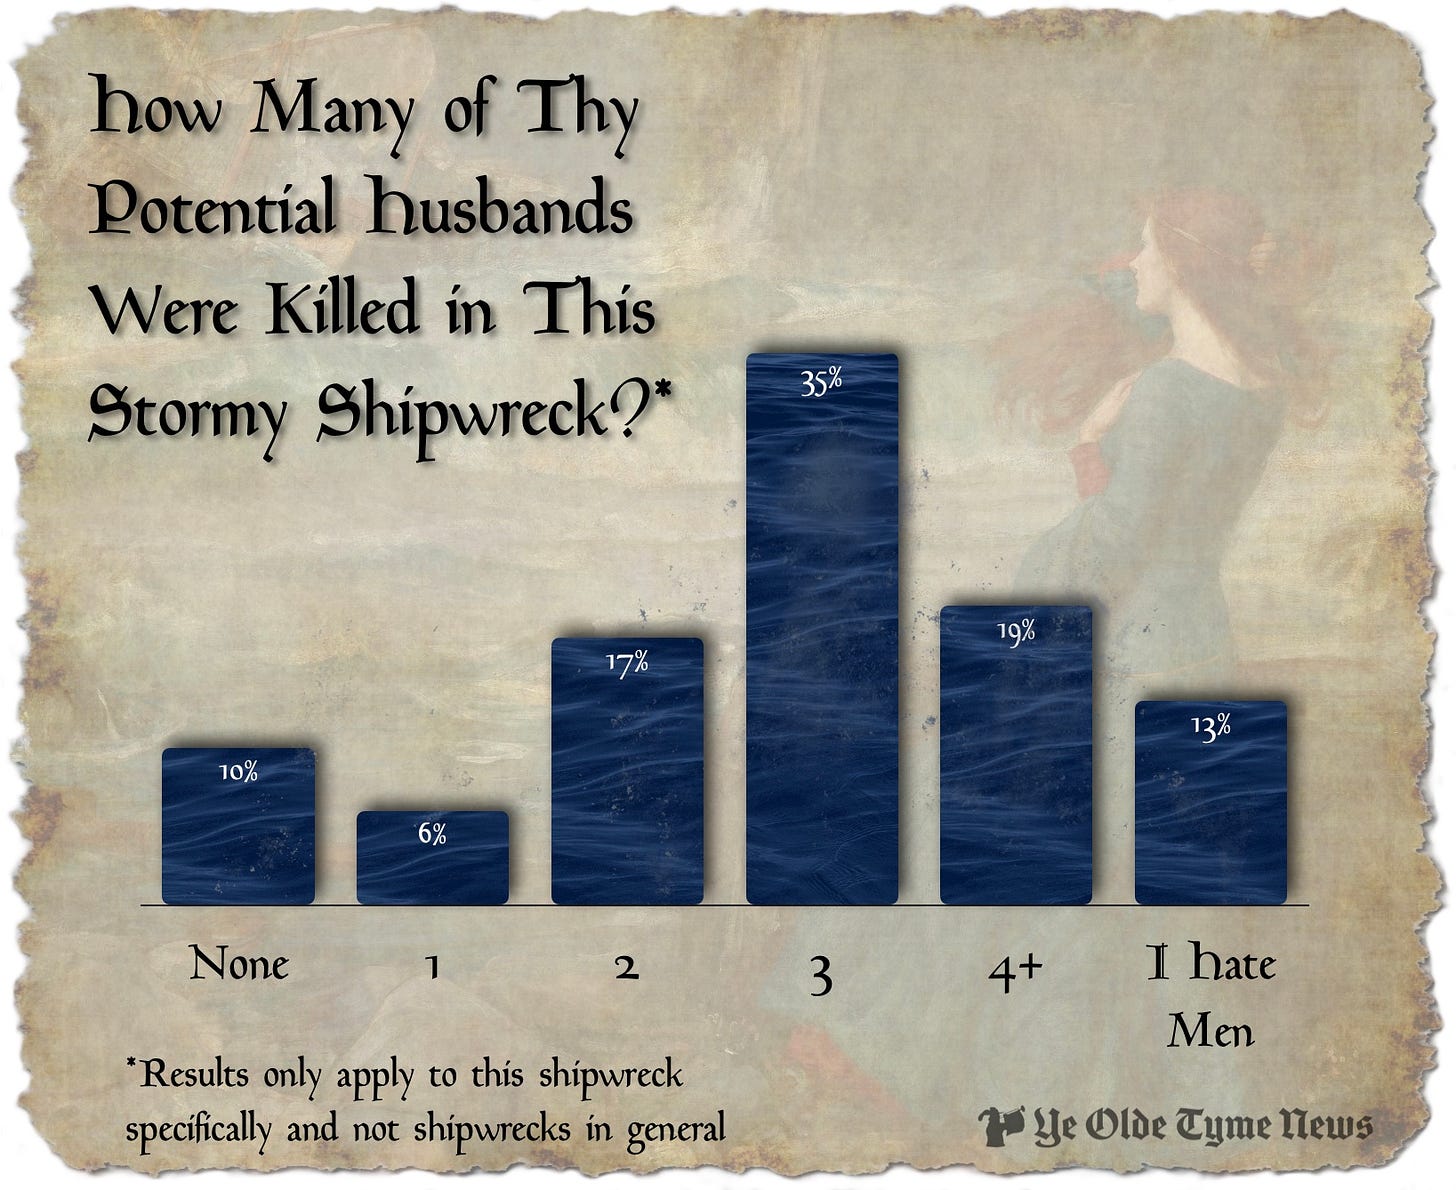 How many of thy potential husbands were killed in this stormy shipwreck chart